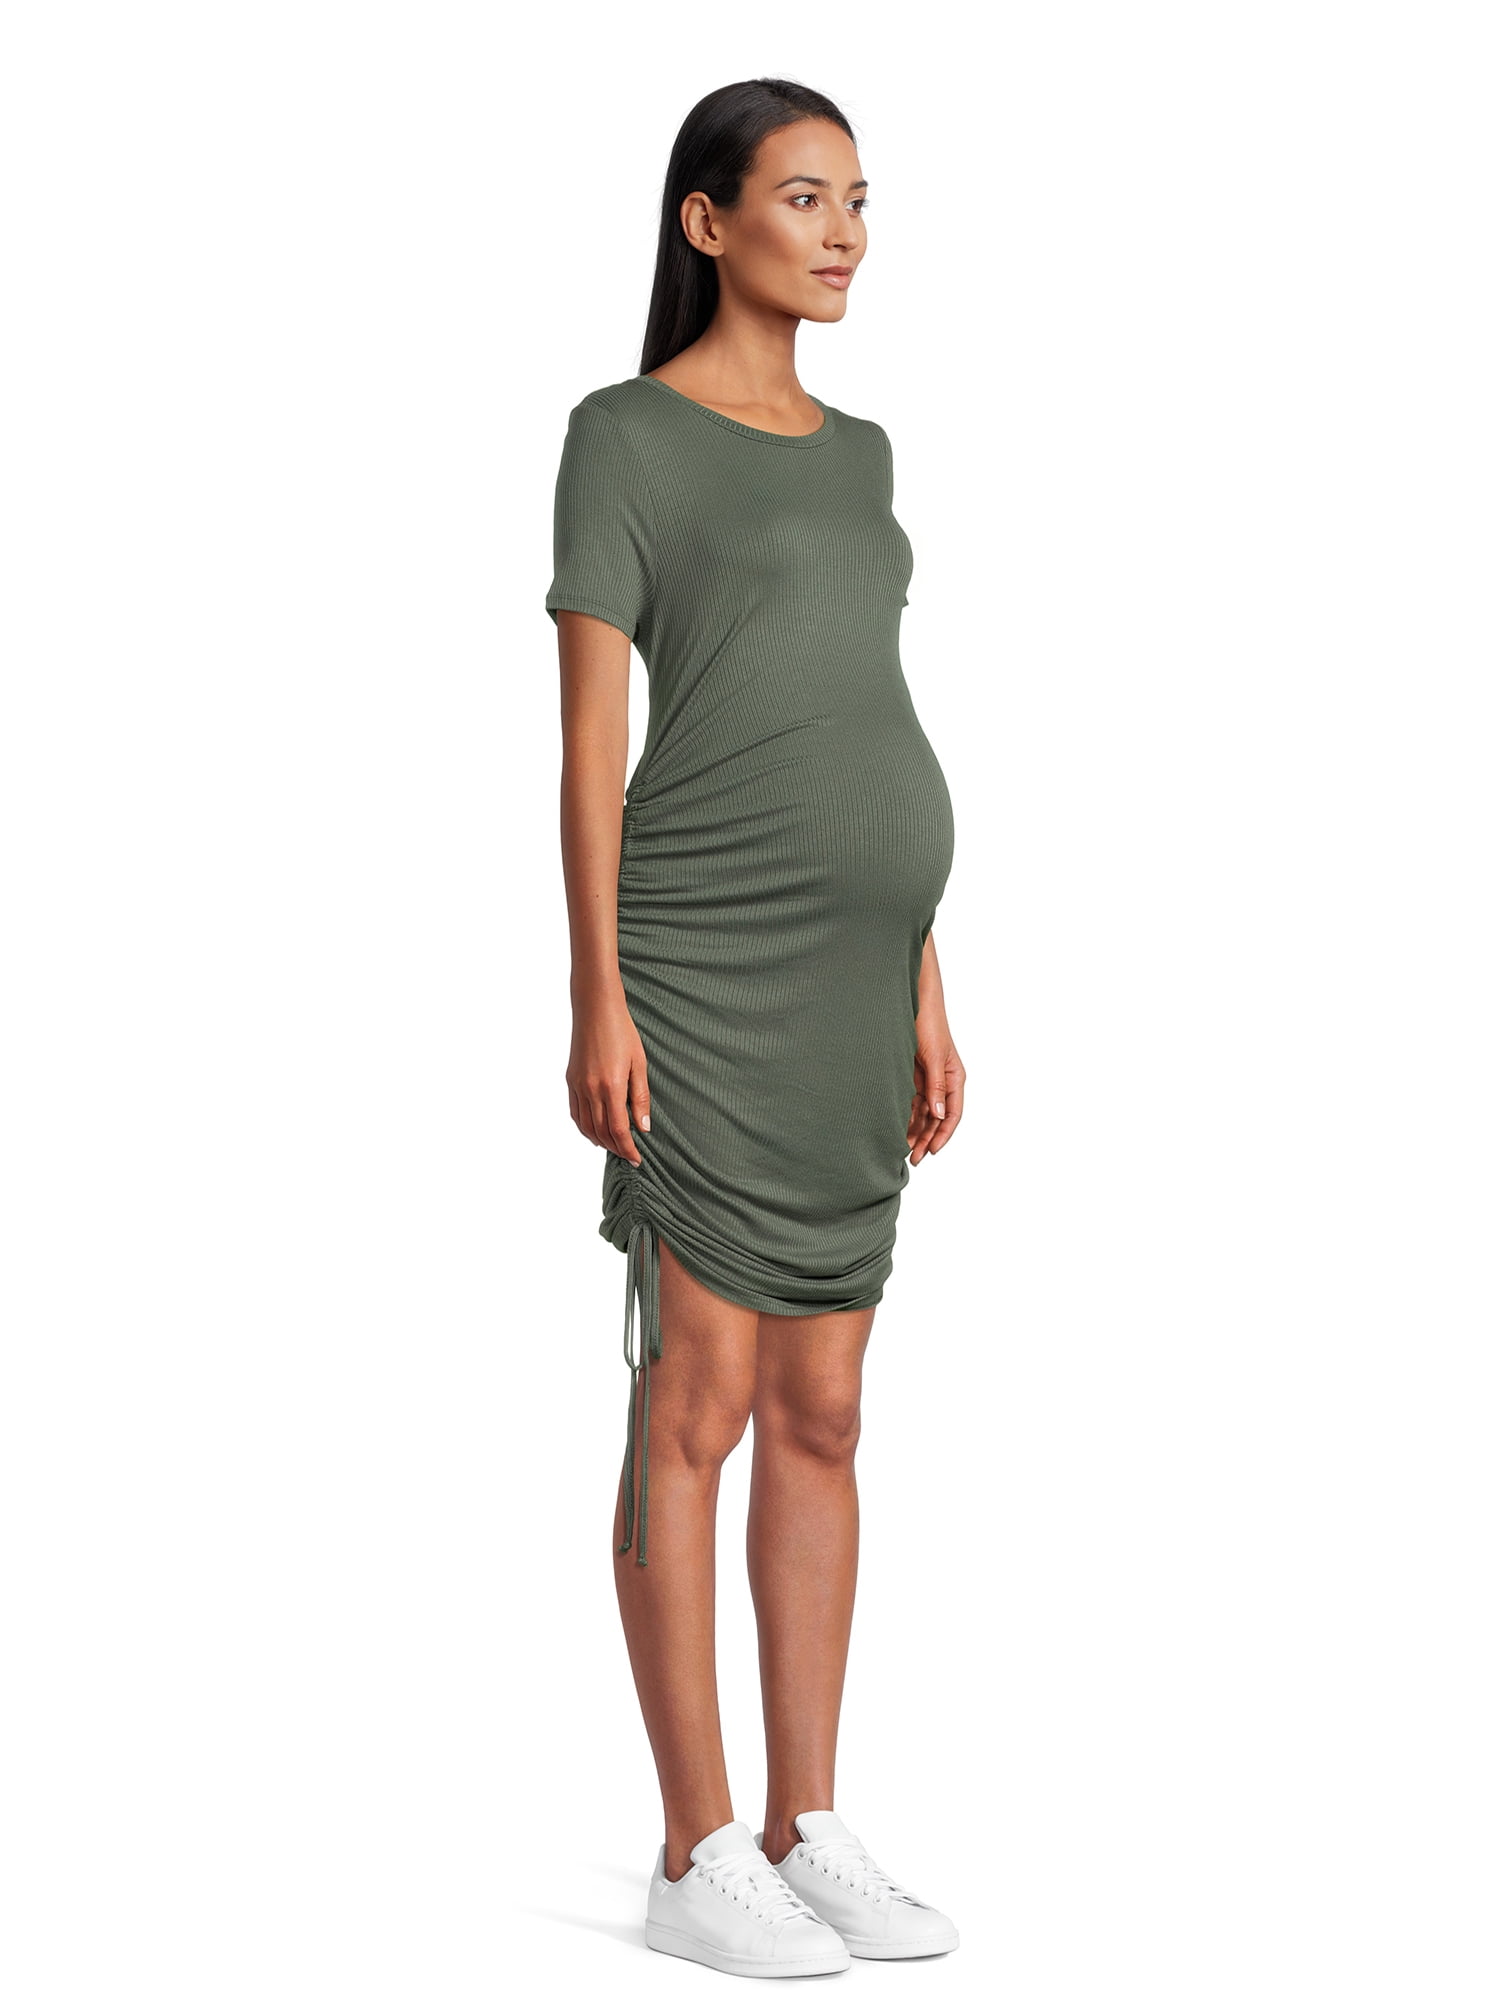 Destination Maternity Women's Ruched Bodycon Dress with Short